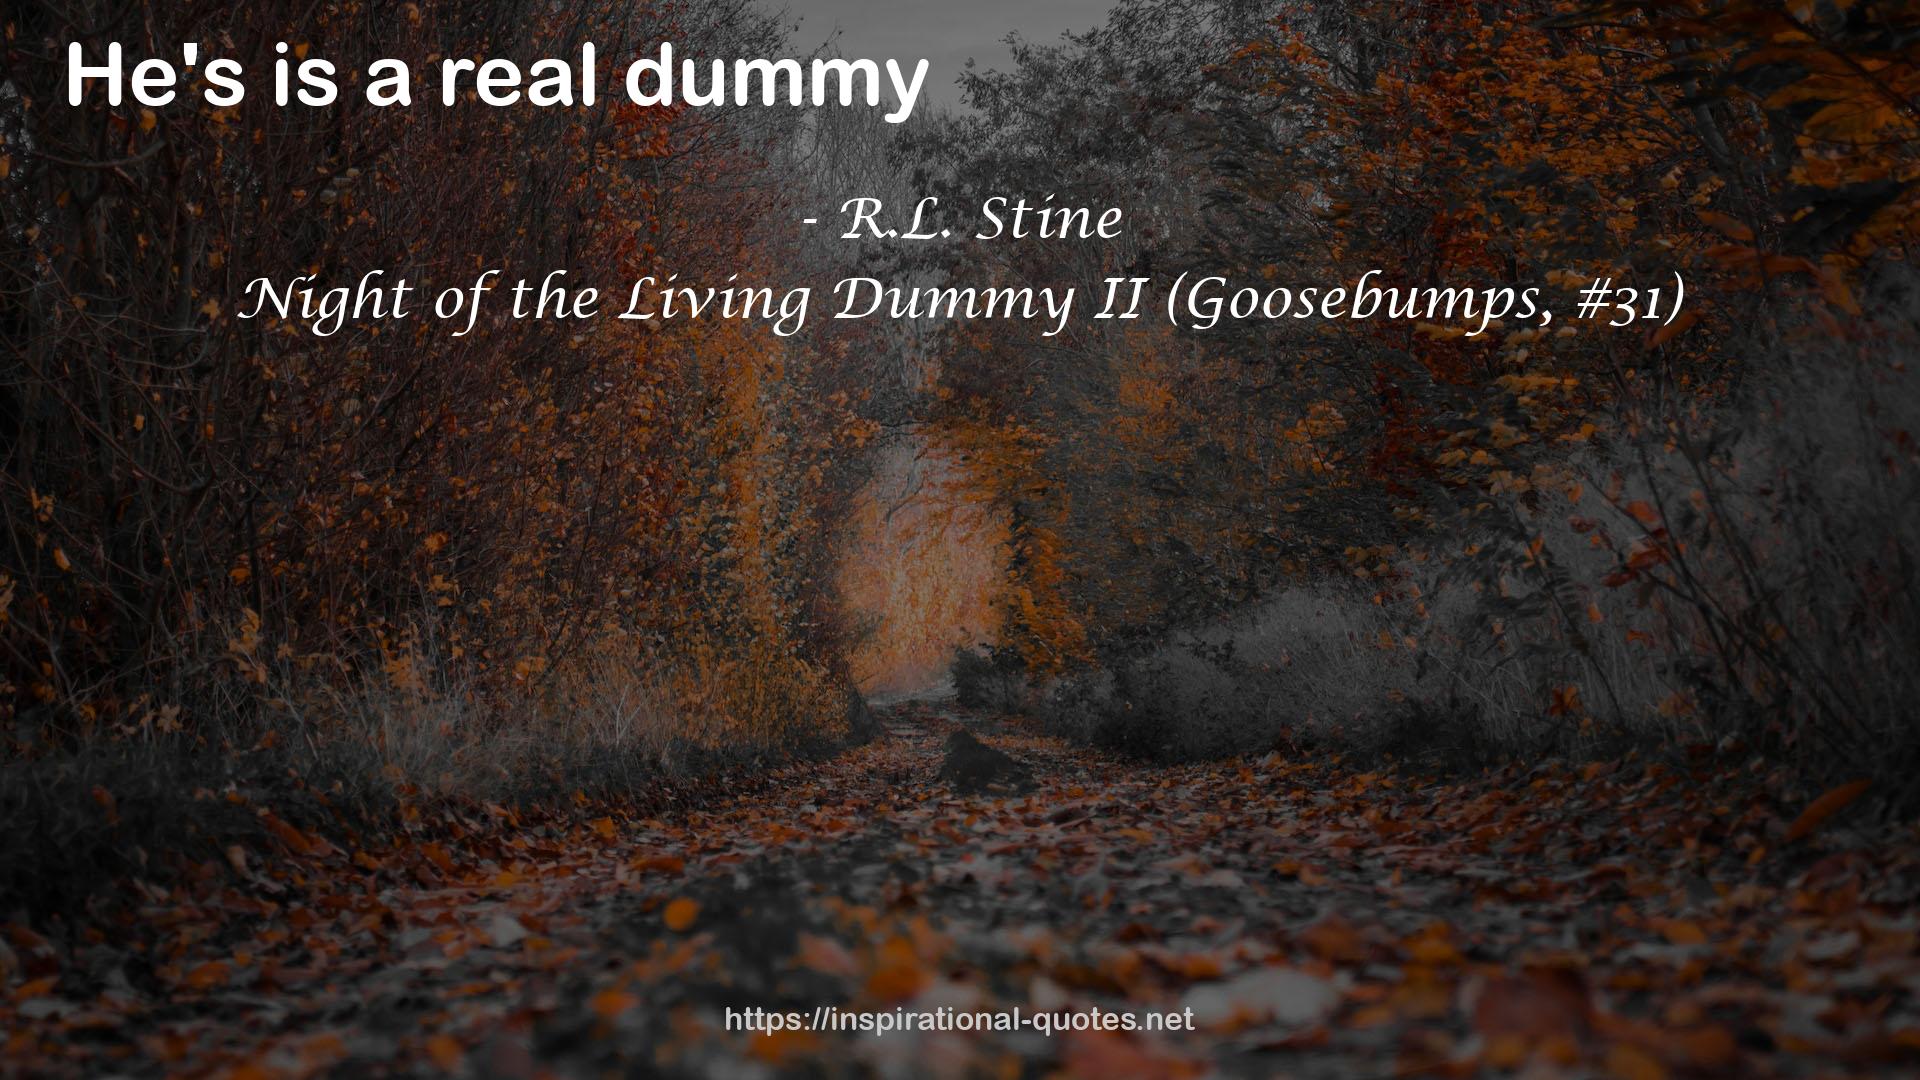 Night of the Living Dummy II (Goosebumps, #31) QUOTES